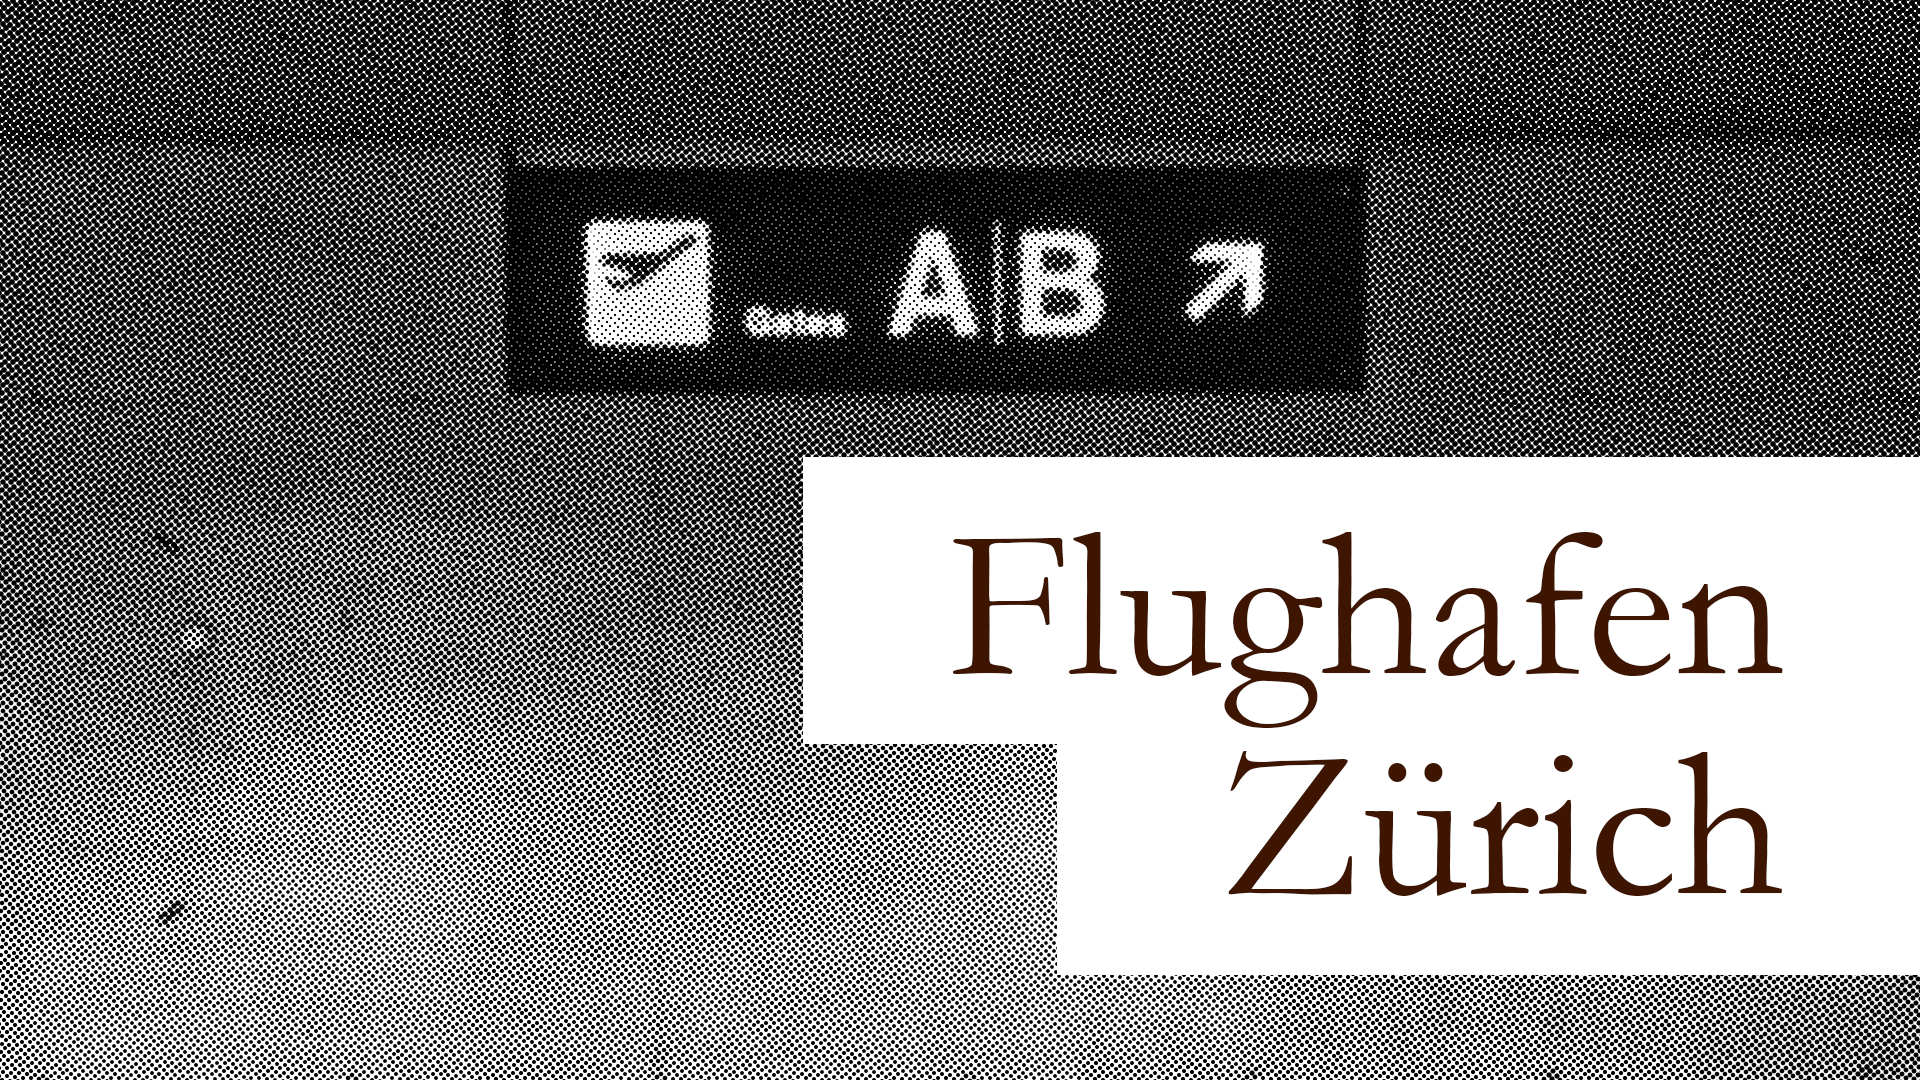 Zurich Airport for the growth of the travel industry